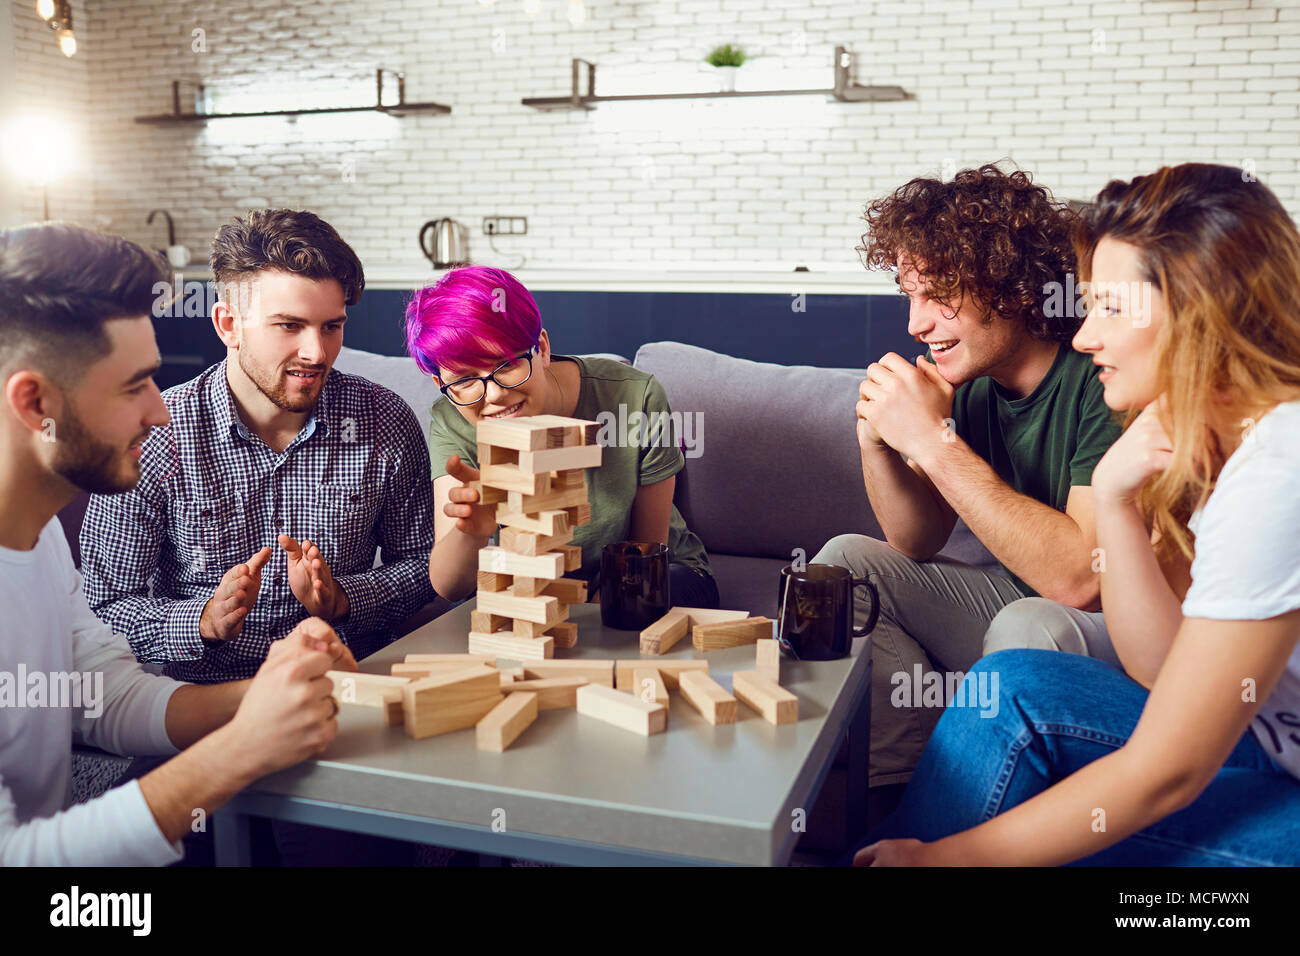 A cheerful group of friends play board games in the room. Stock Photo